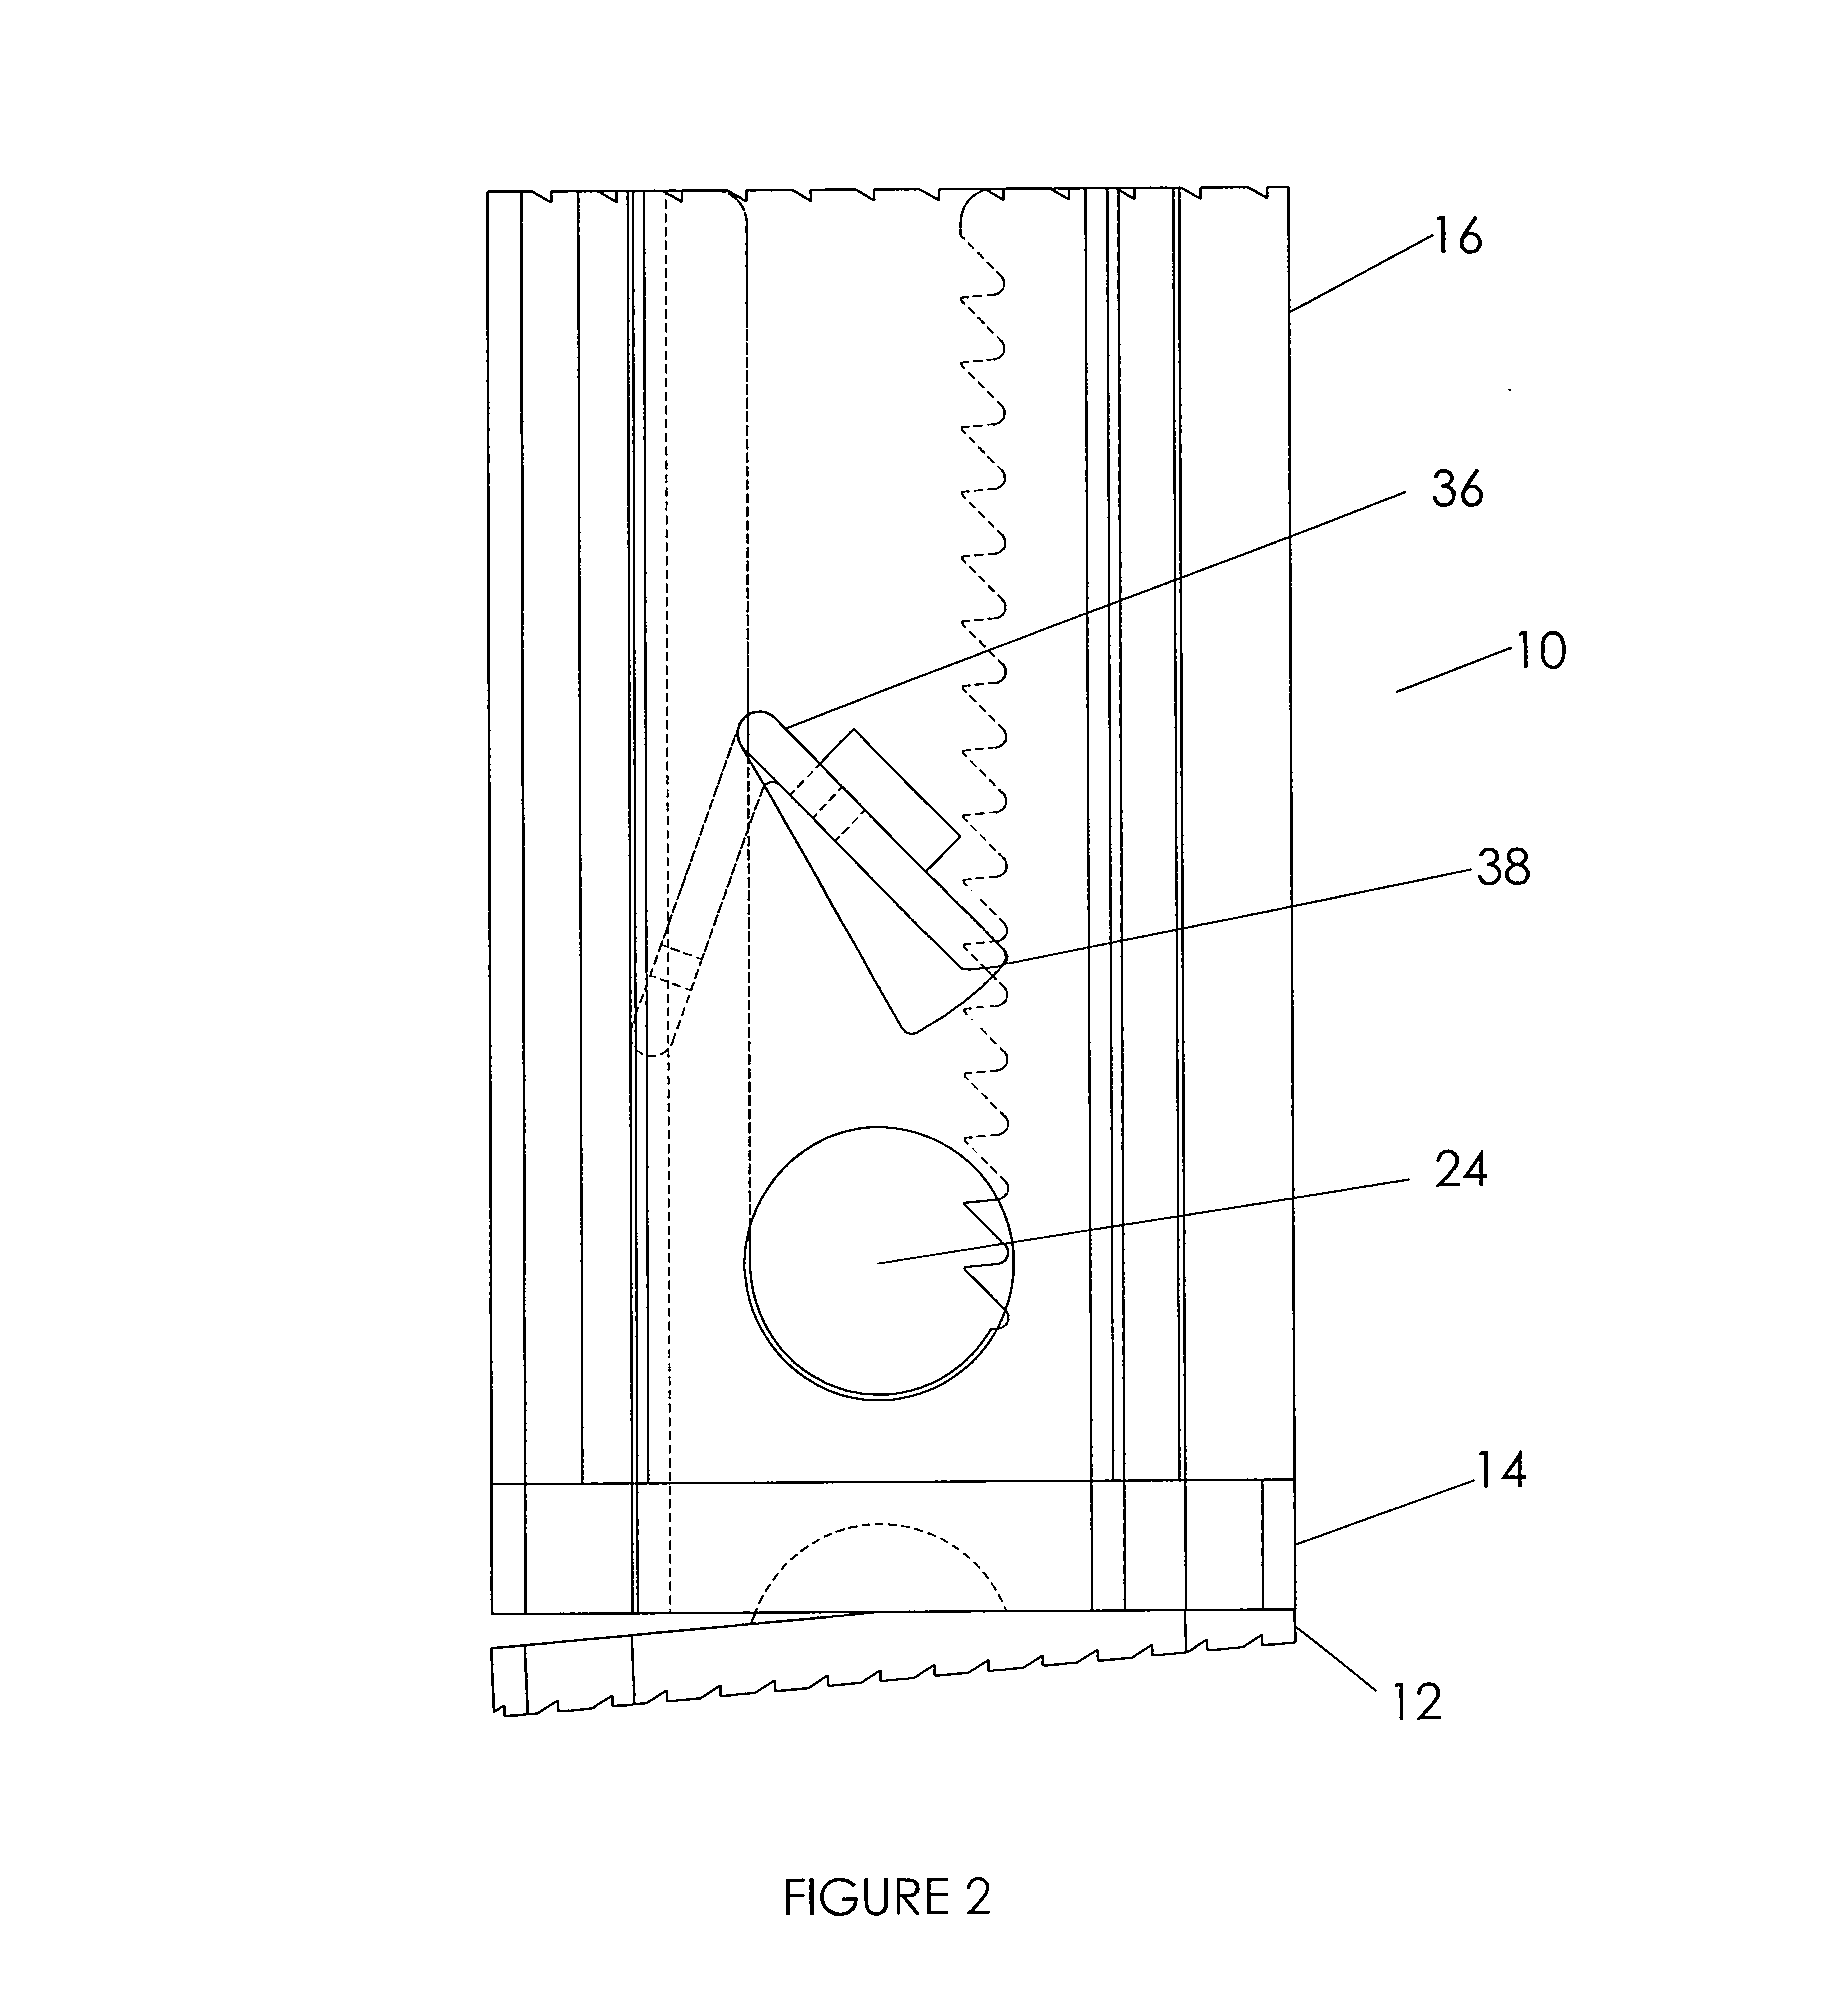 Expandable corpectomy device